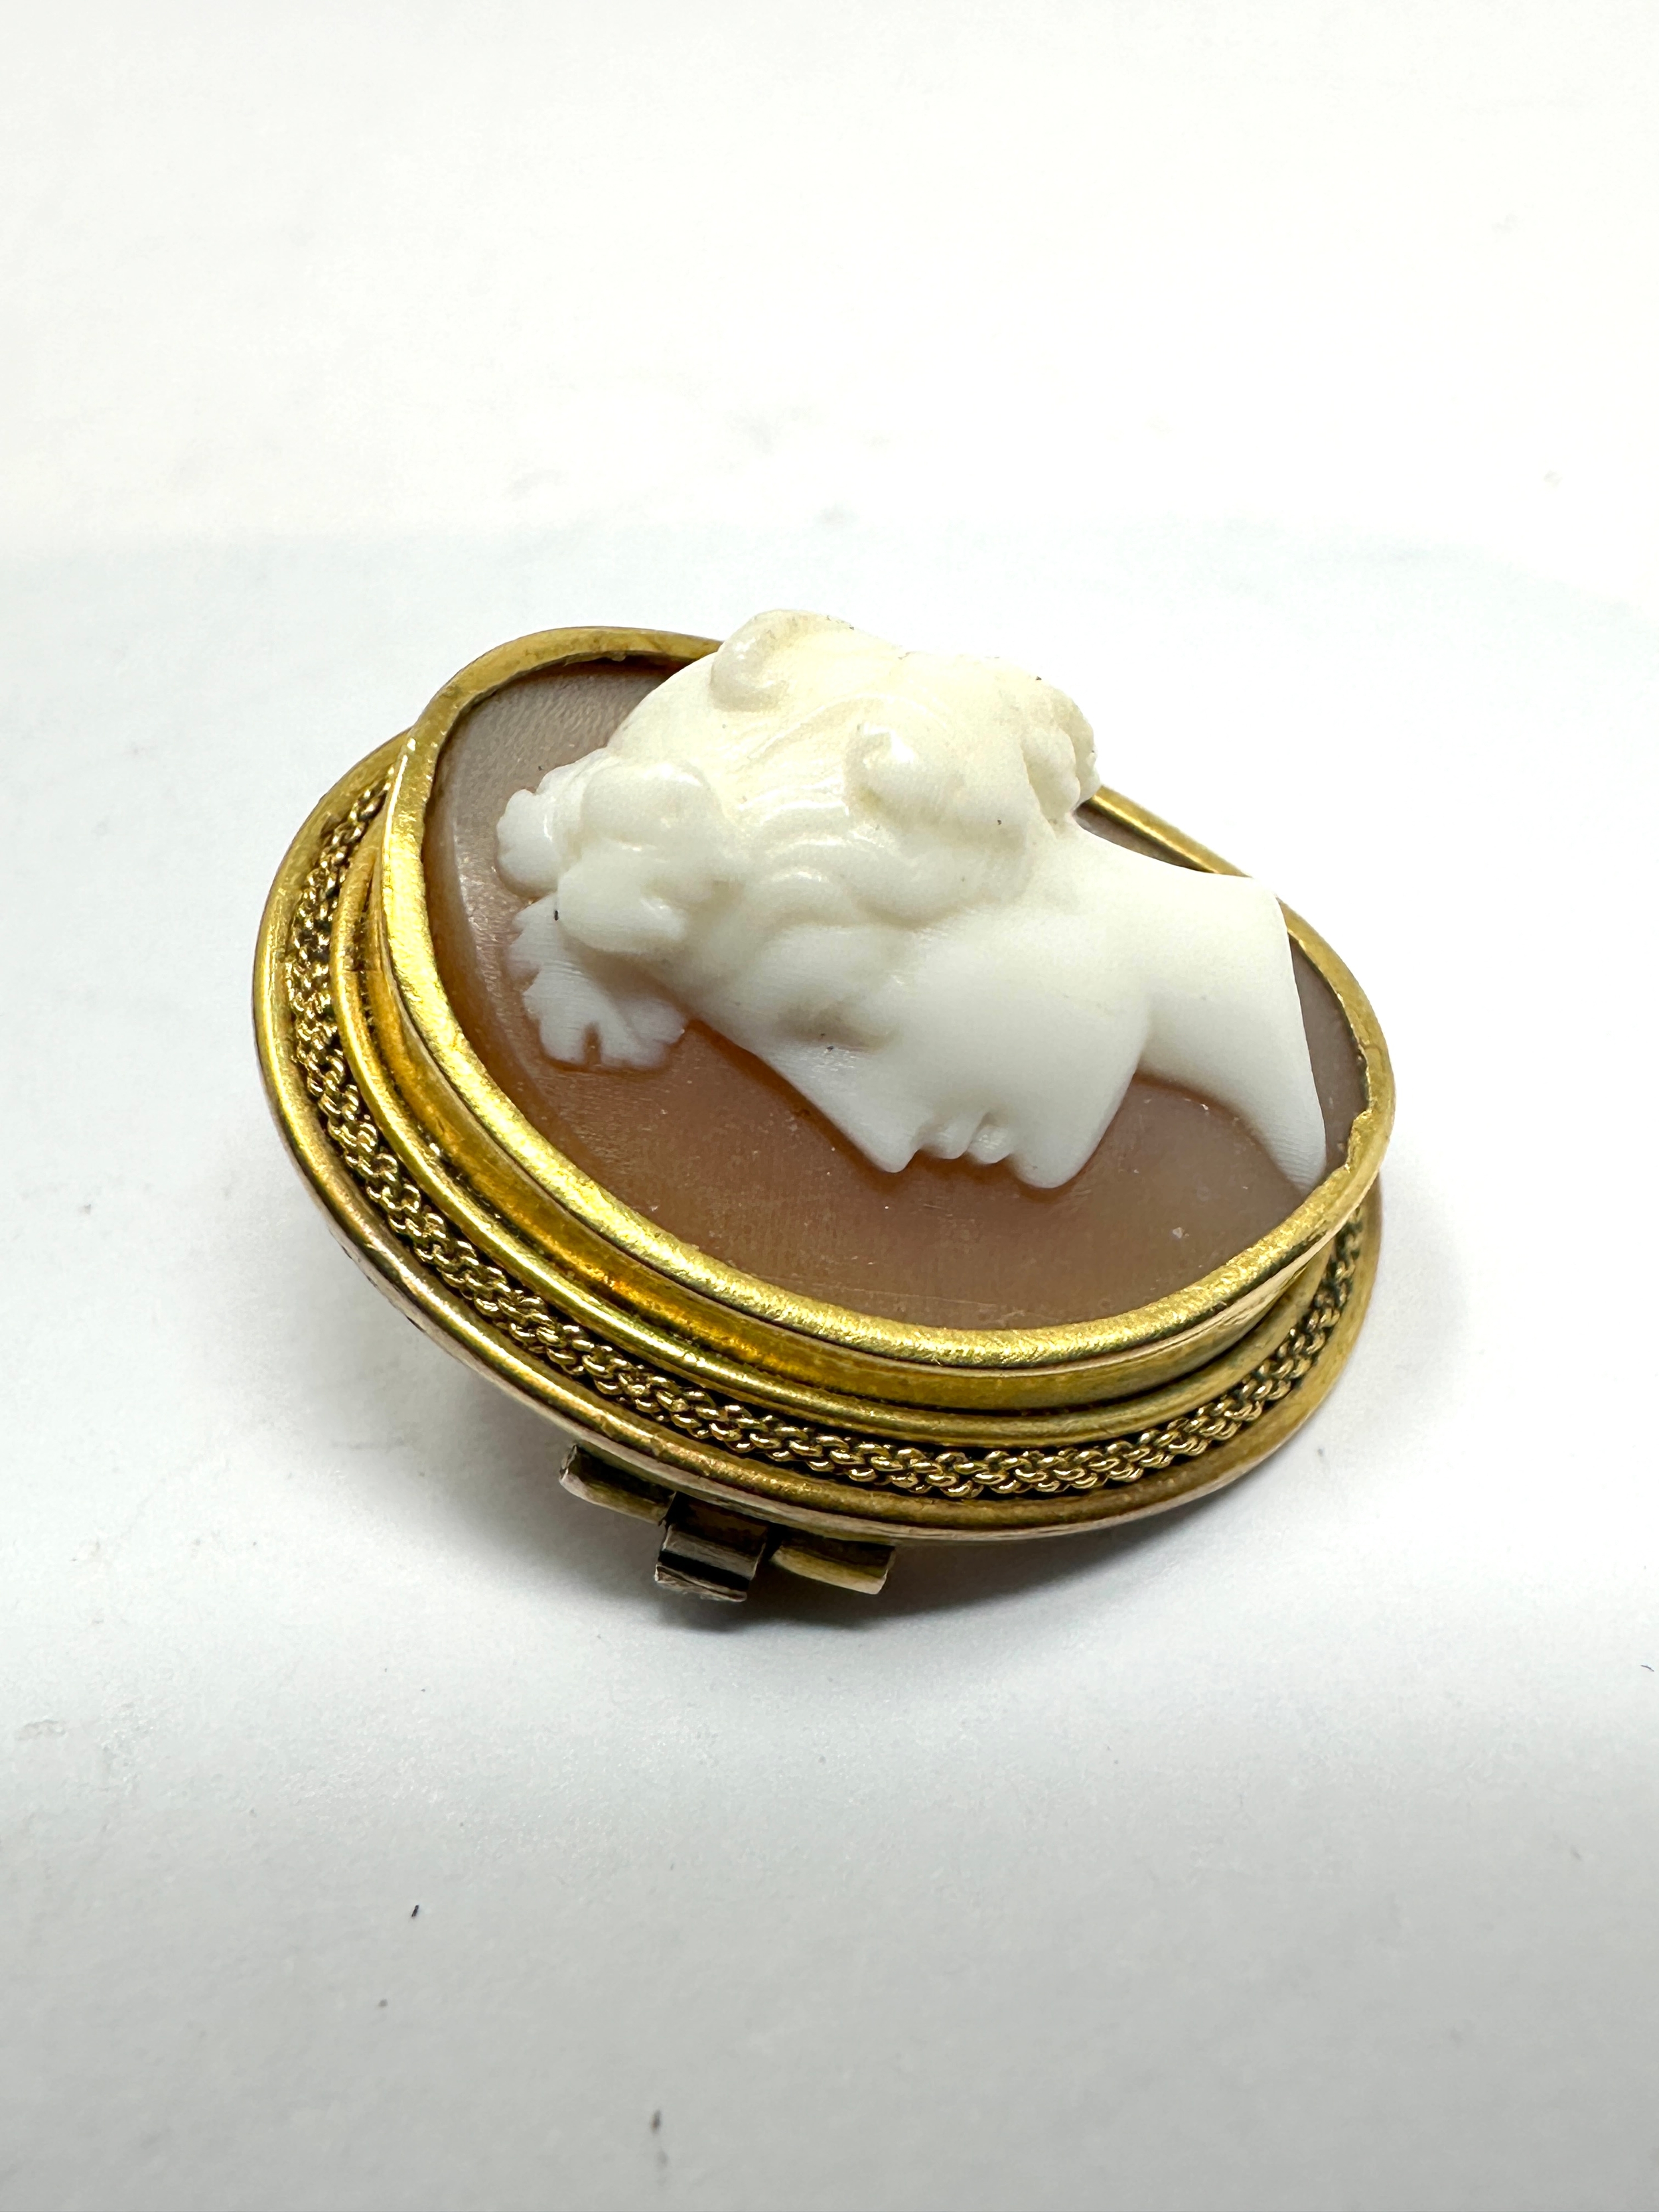 Antique gold framed cameo brooch weight 4.5g - Image 2 of 3